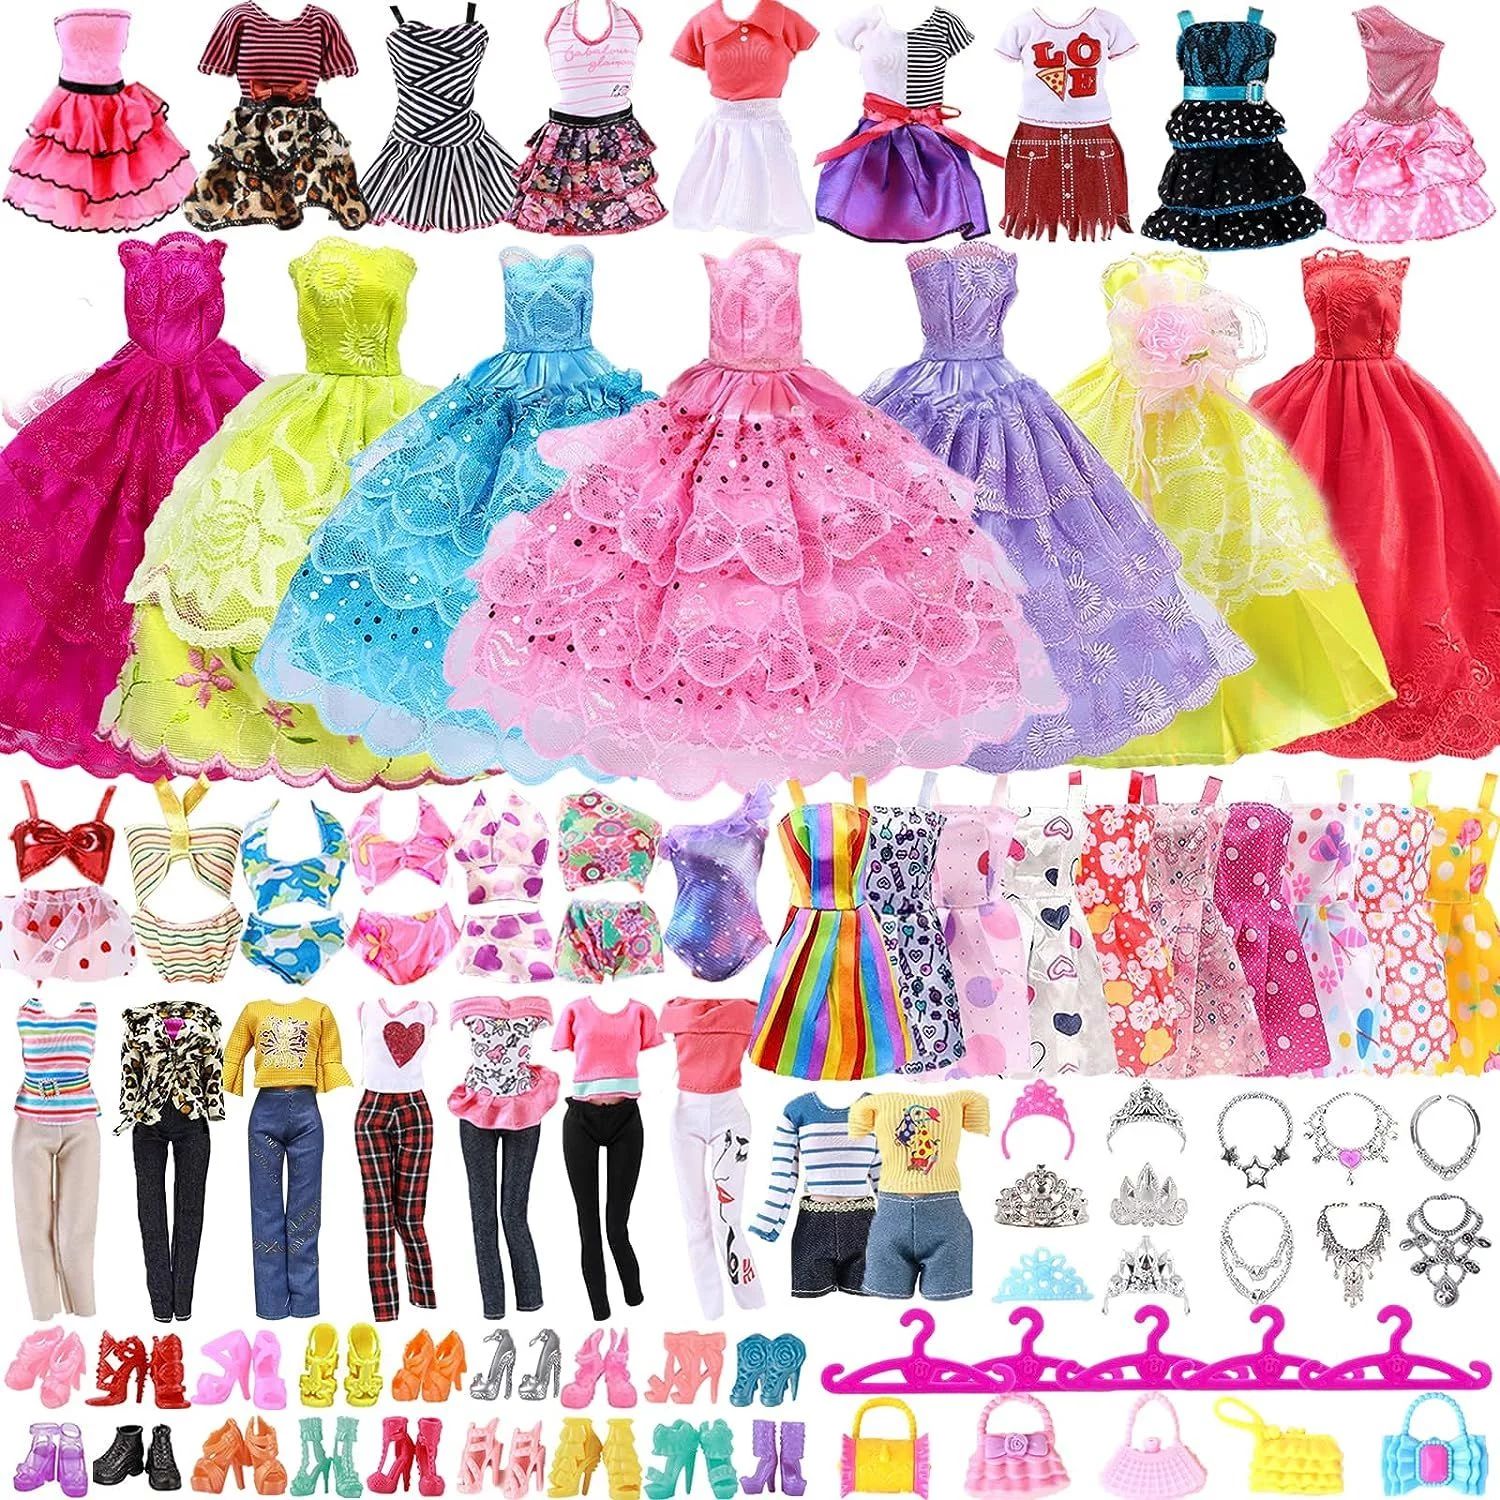 Cfowner 65 PCS Clothes and Accessories for Dolls Including 5 Wedding Gown Dresses 10 Slip Dress 2... | Walmart (US)